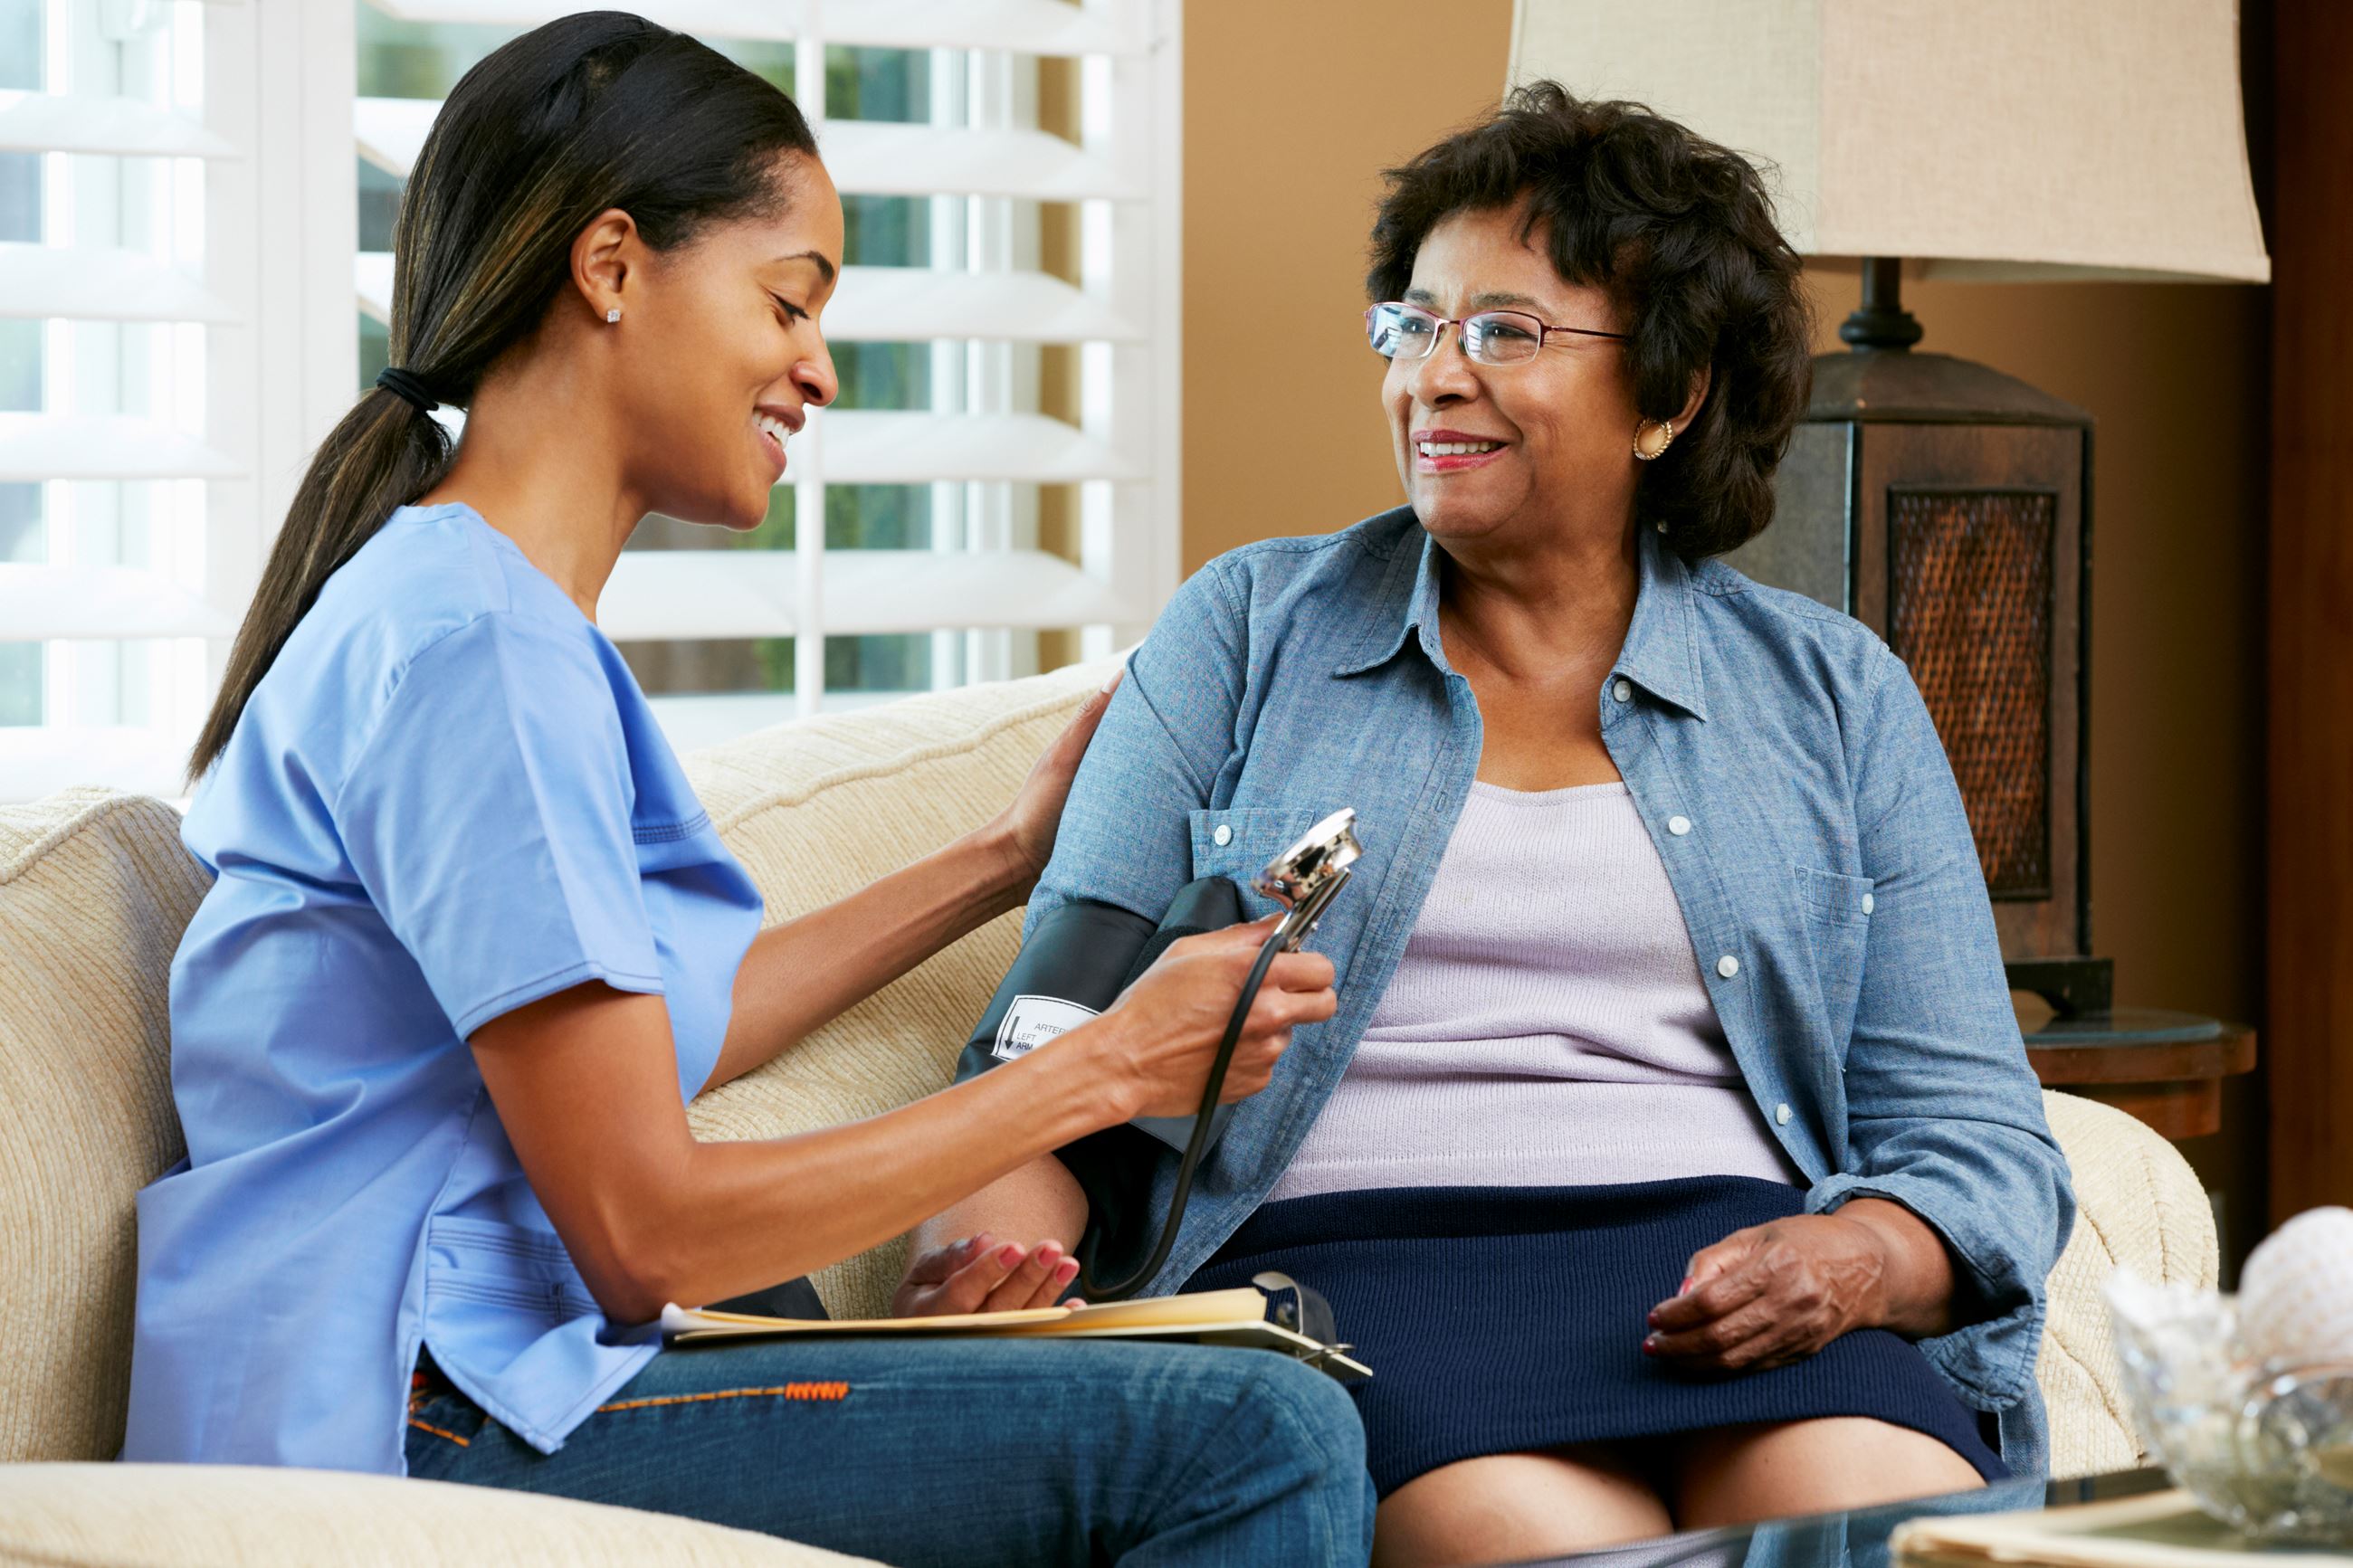 How To Find Good Home Care Jobs